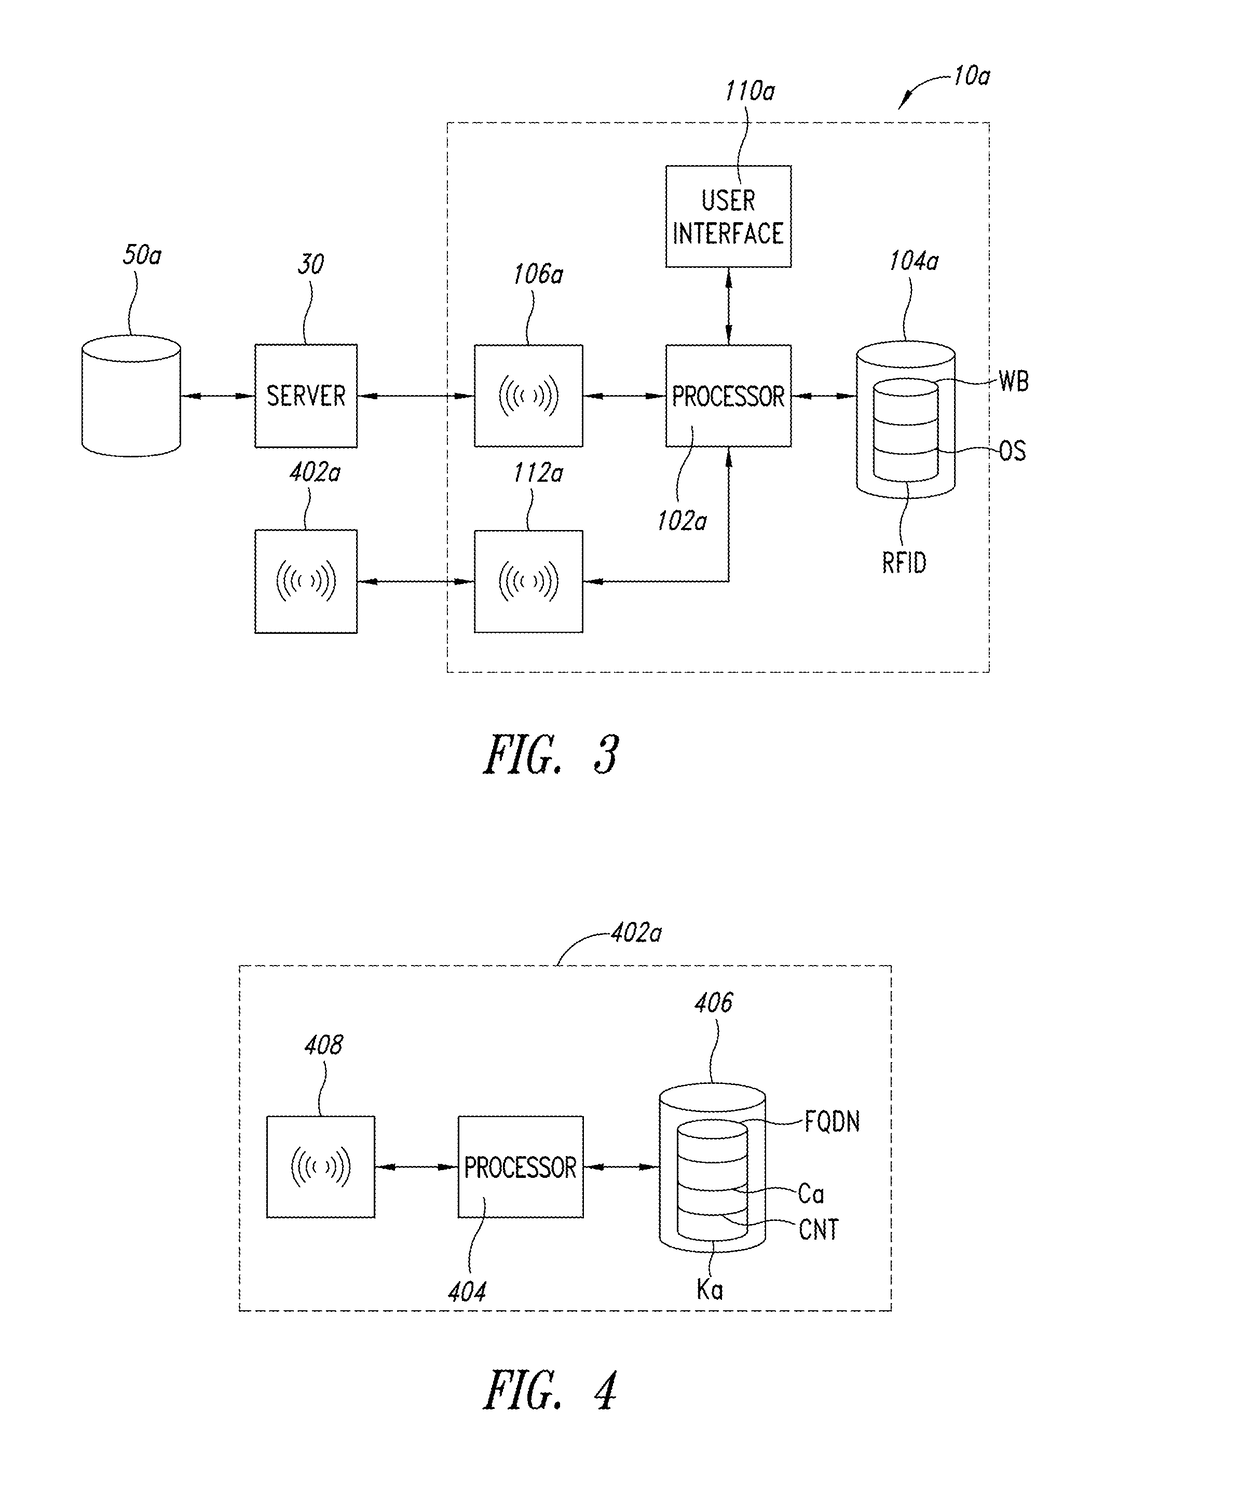 Tag, related method and system for identifying and/or authenticating objects